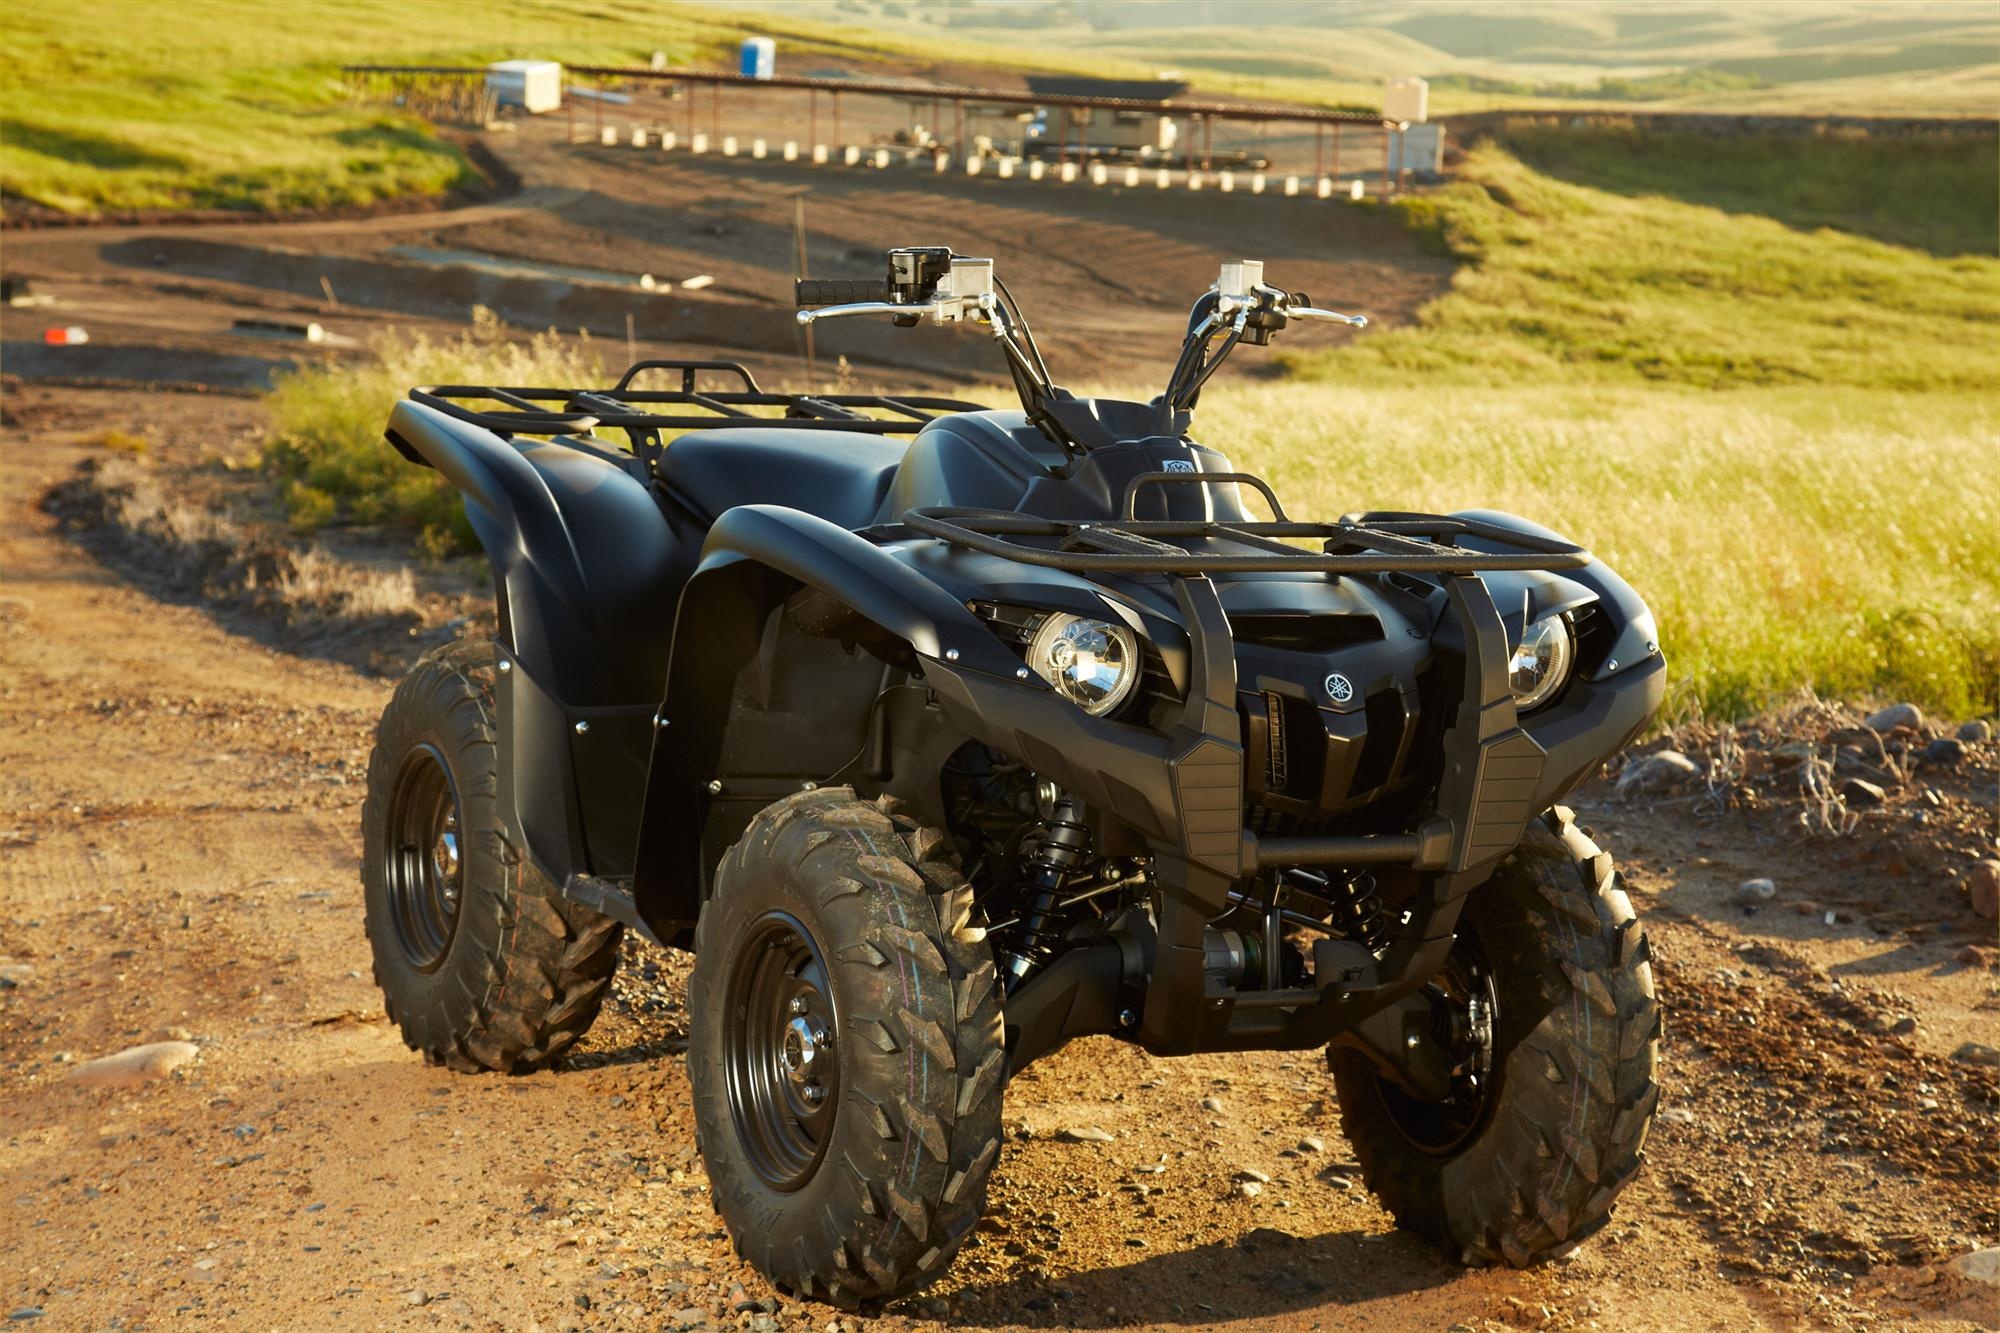 Yamaha Grizzly 700 EPS, Grizzly bear power, Yamaha off-road, Power performance, 2000x1340 HD Desktop